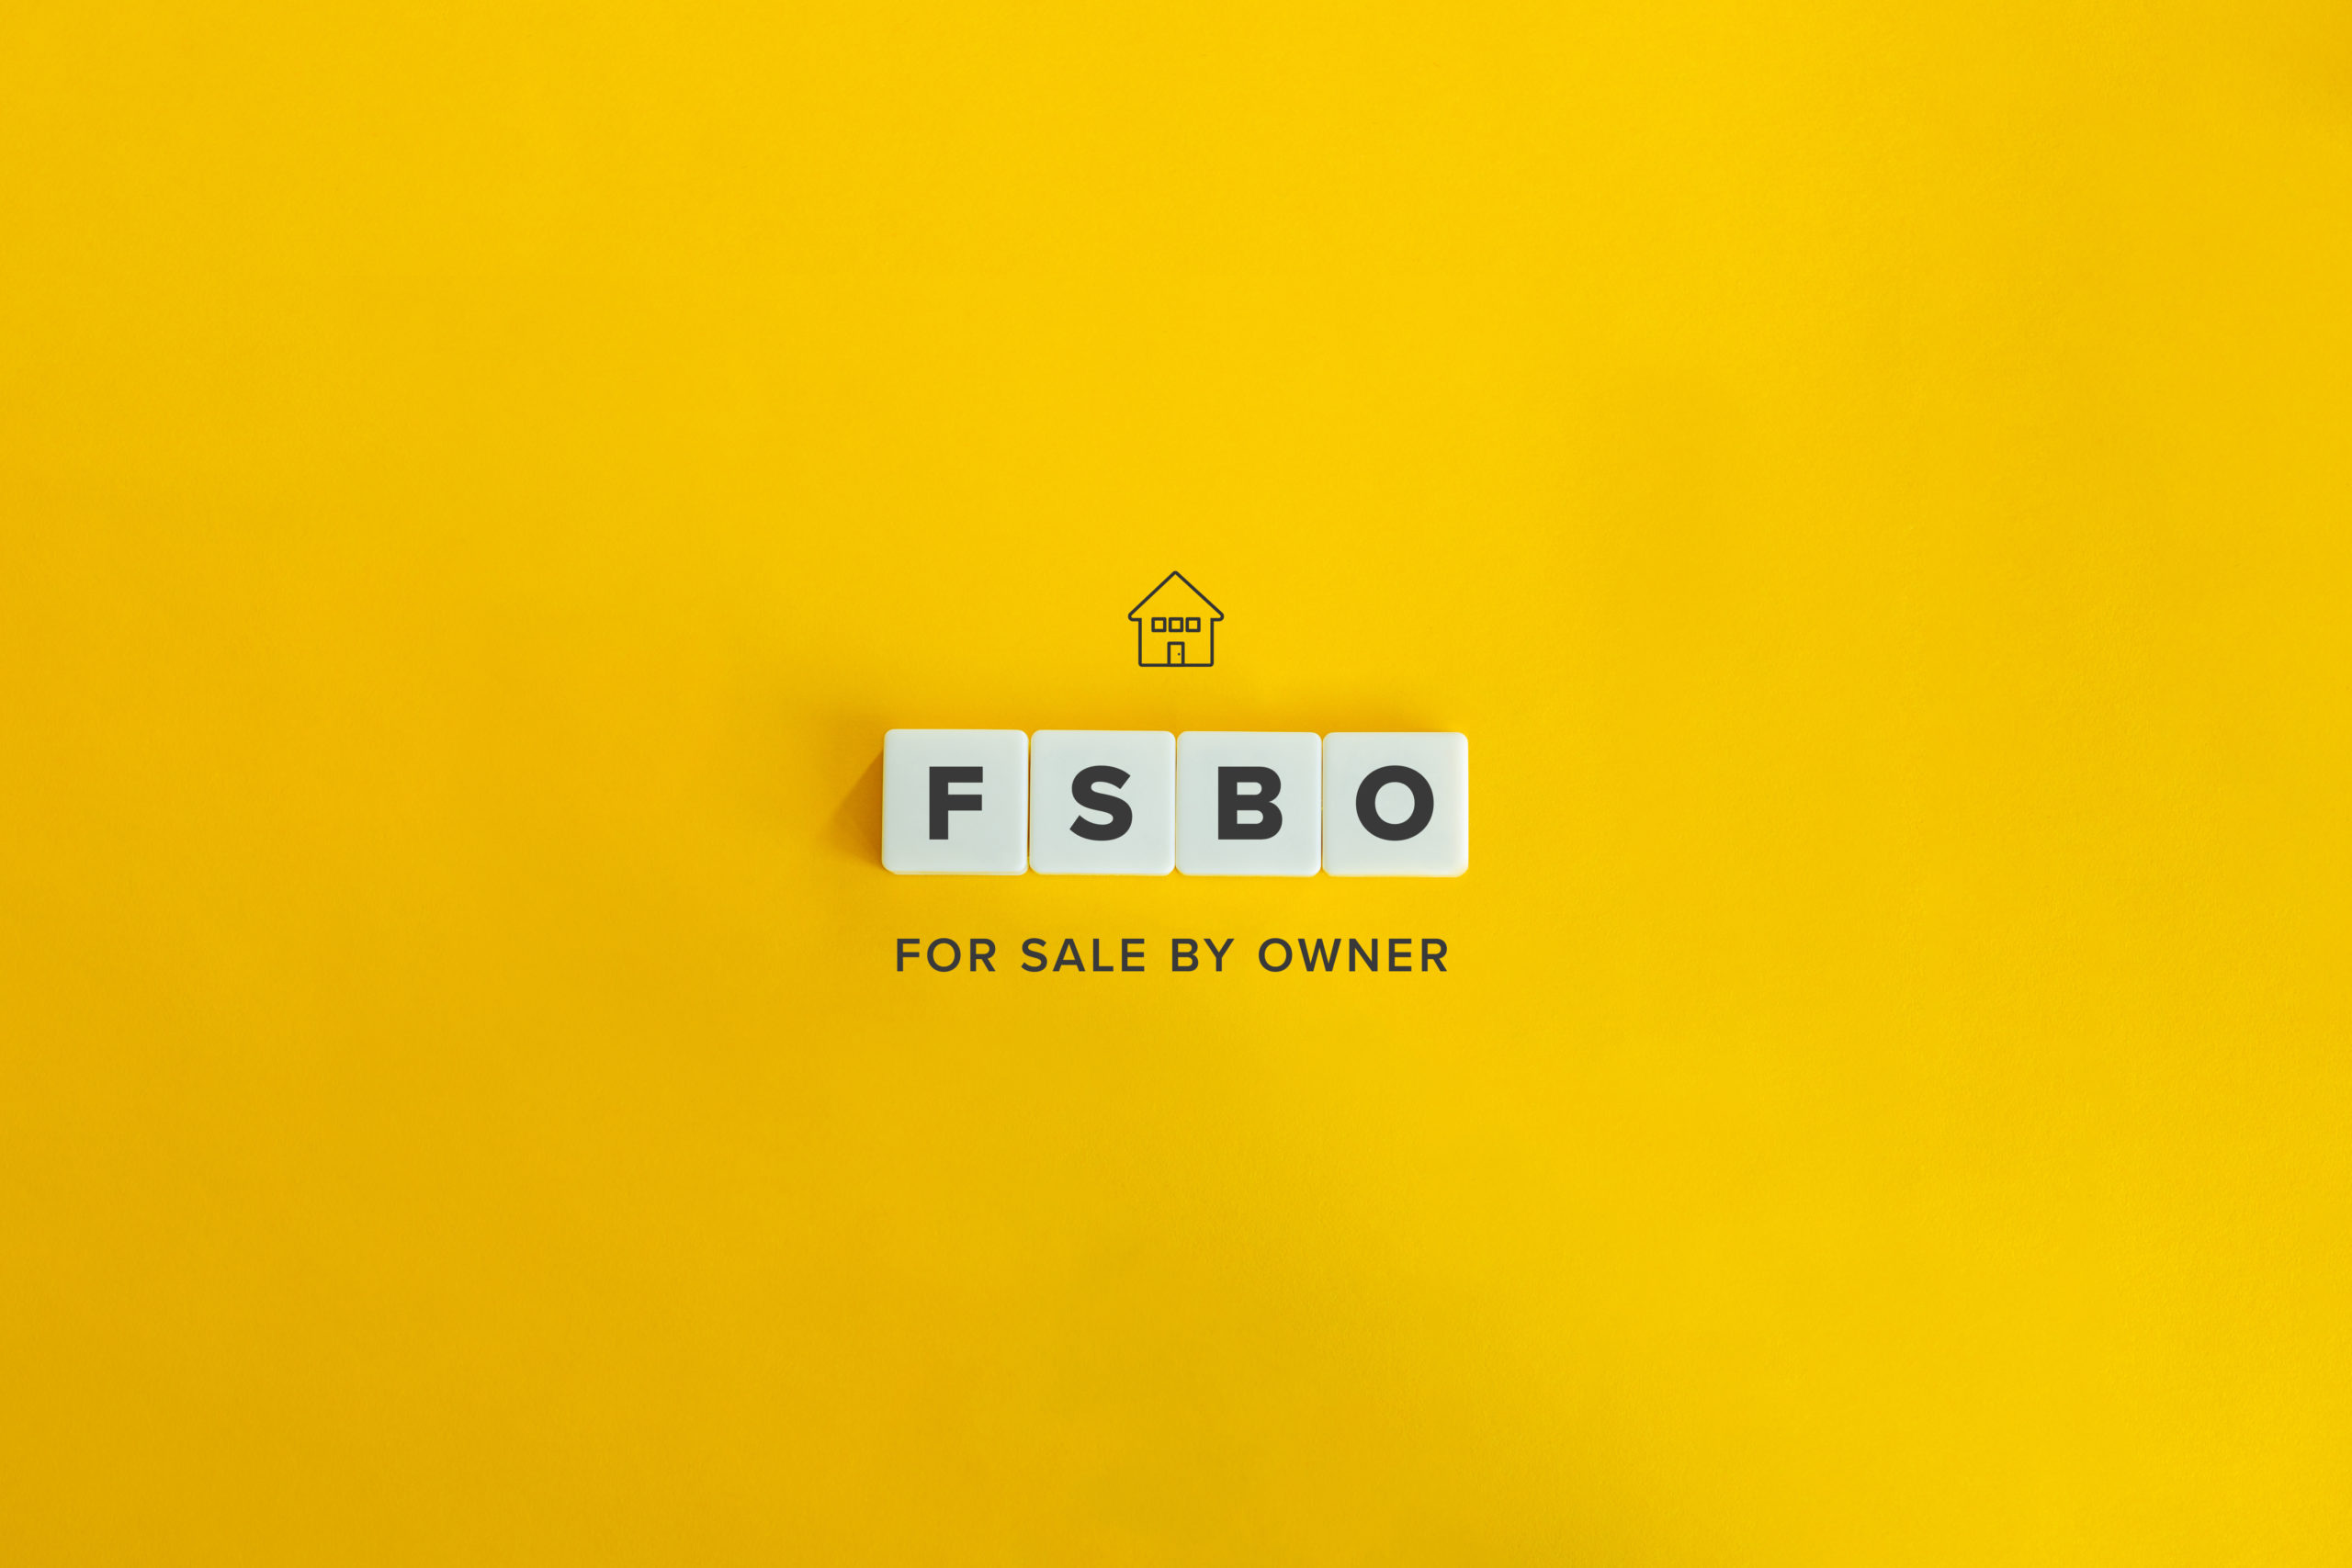 For Sale by Owner (FSBO) Banner. Letter tiles on bright yellow background. Minimal aesthetics.